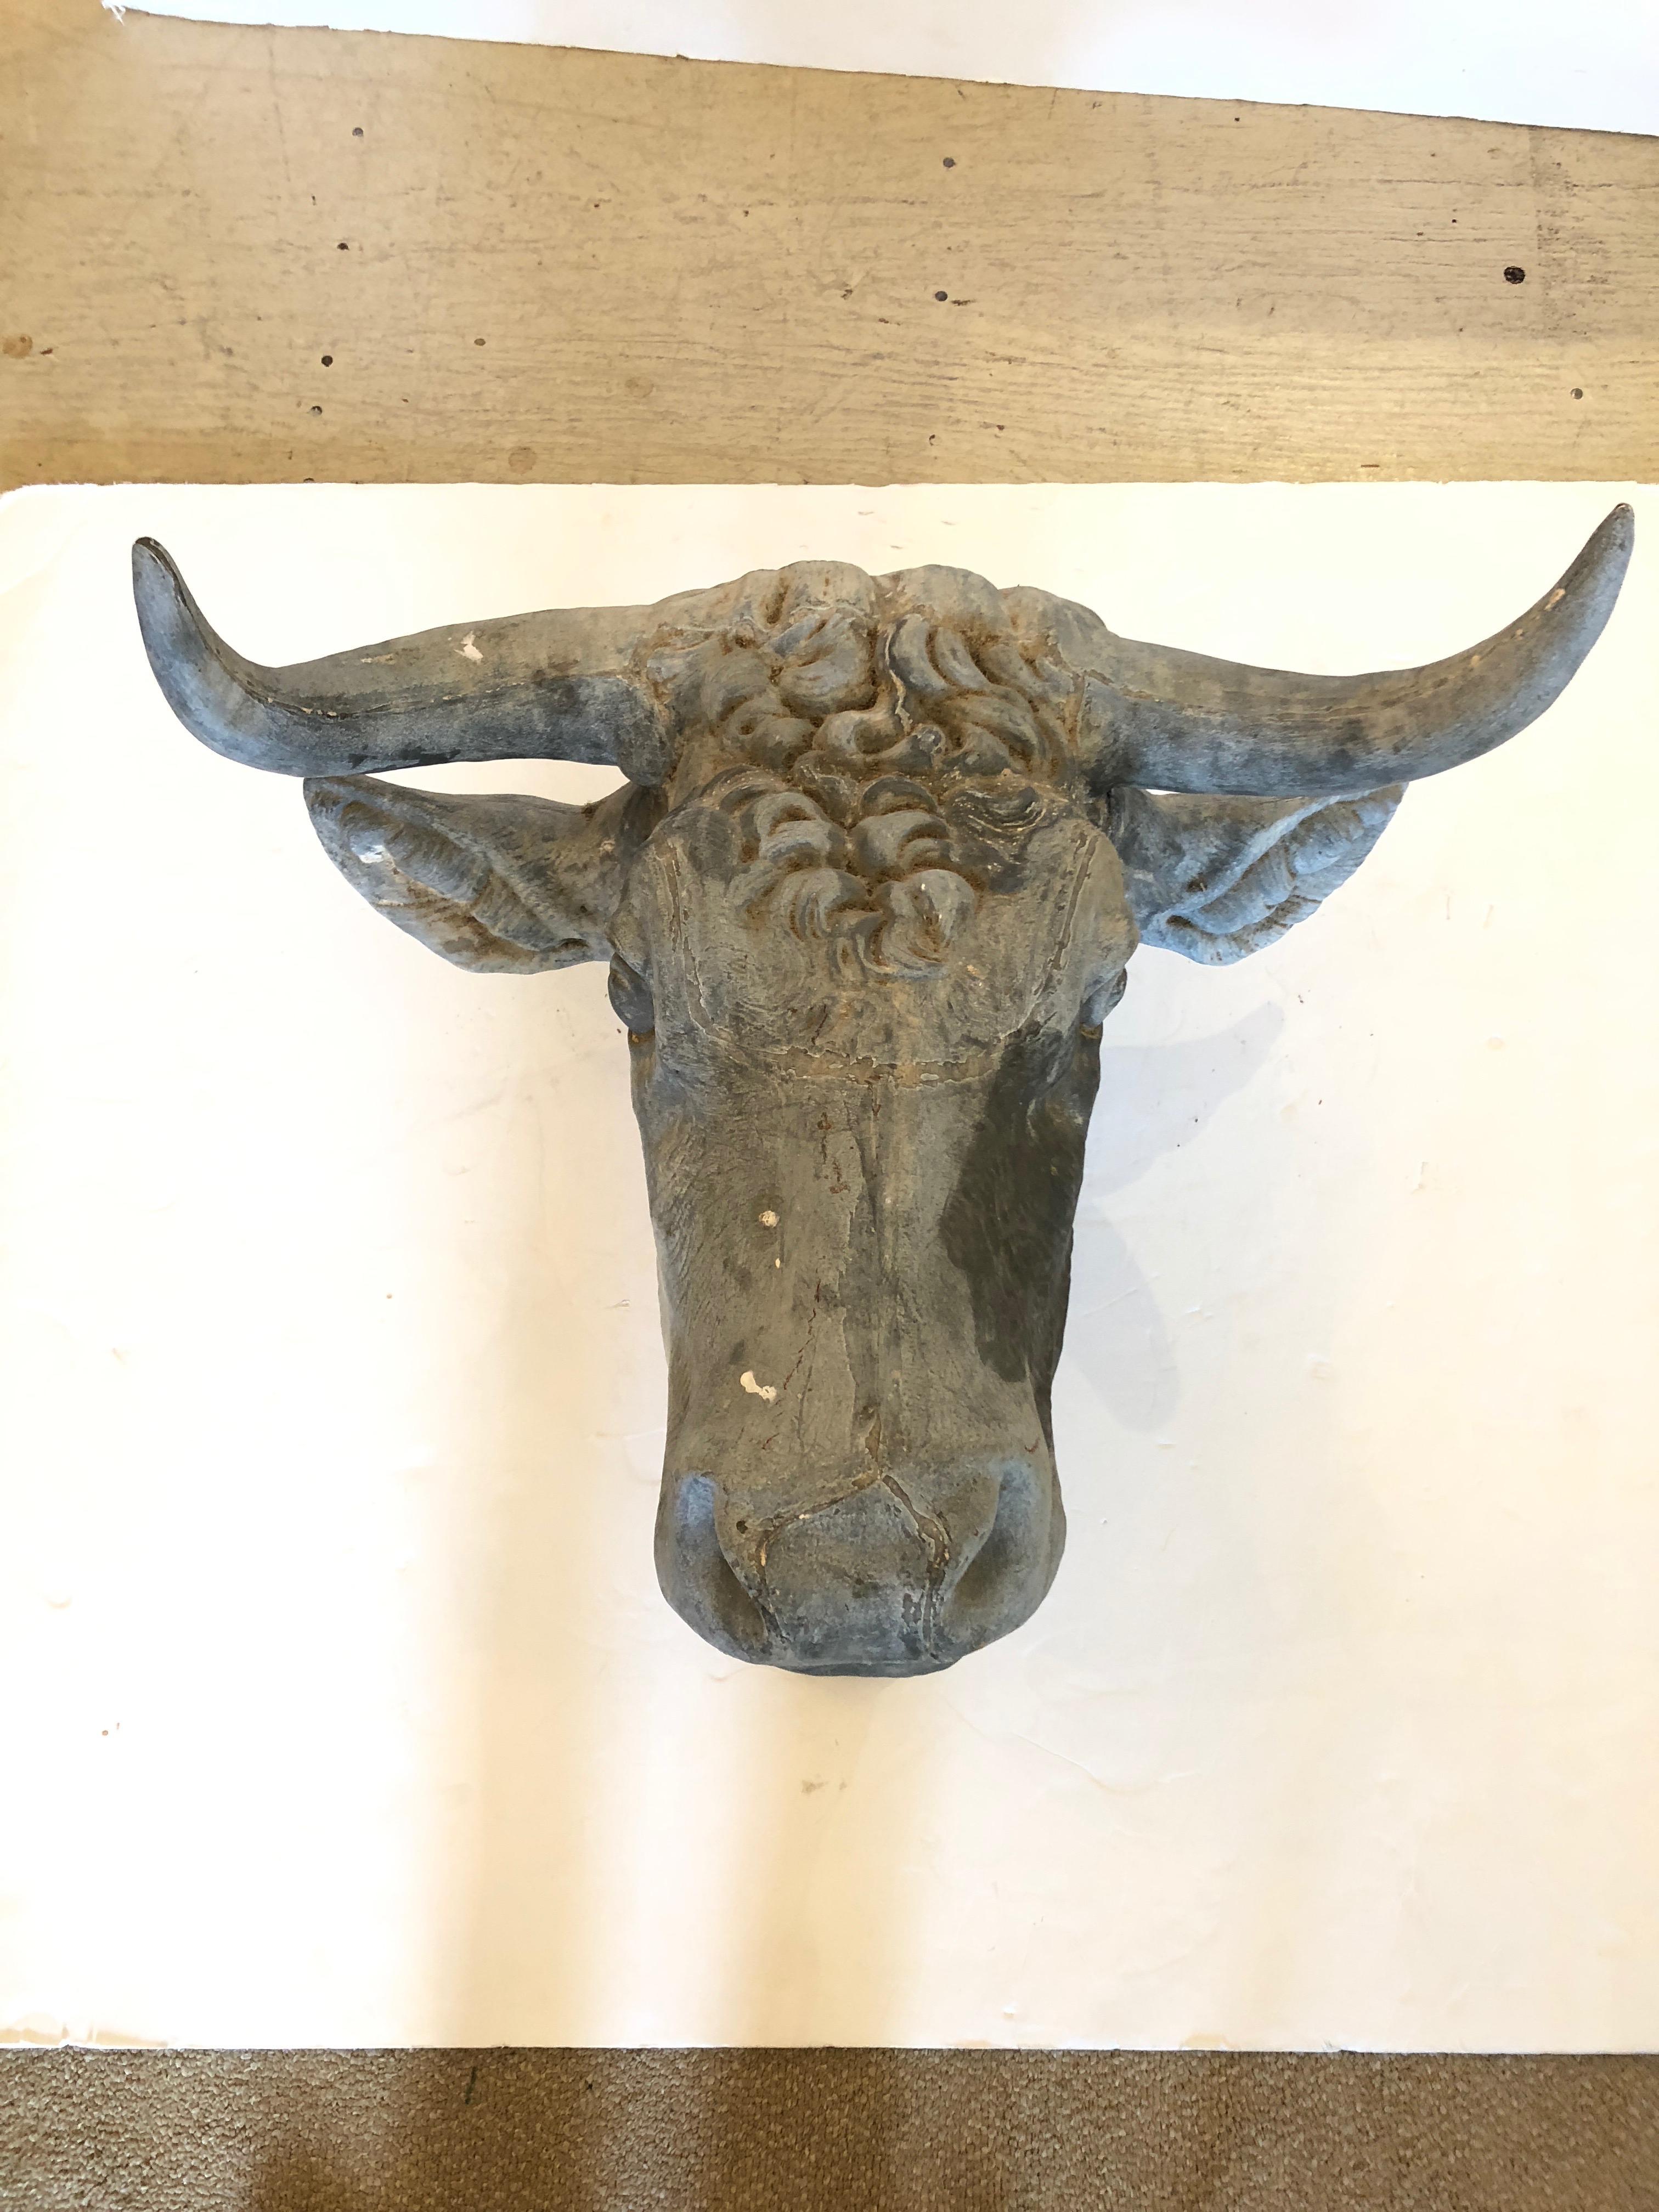 A rare antique zinc bull head from France, circa 1860. Originally used as a trade sign for a butcher shop. Wonderful condition, patina of various shades of grey, and a distressed painted reddish band around the back that goes against a wall. Hollow